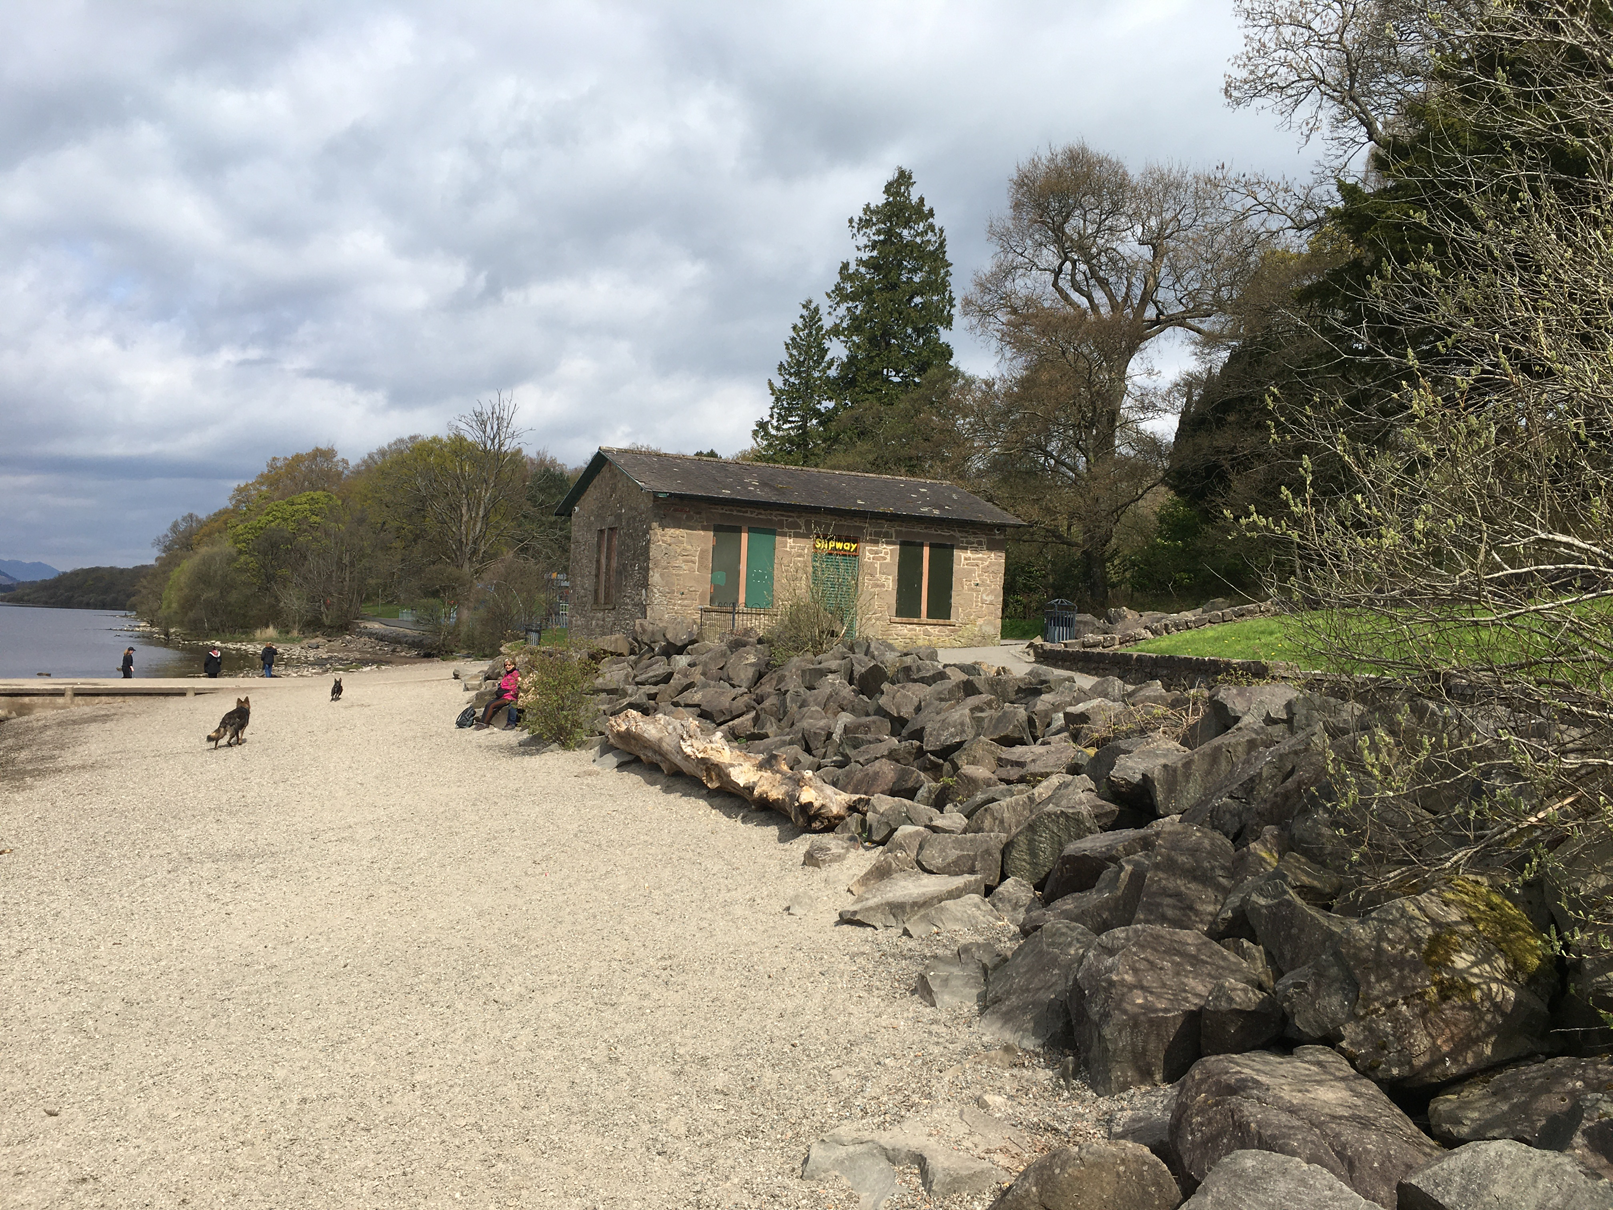 Slipway Kiosk Balloch Castle Country Park Kiosk view from the beach where 2 dogs are walking